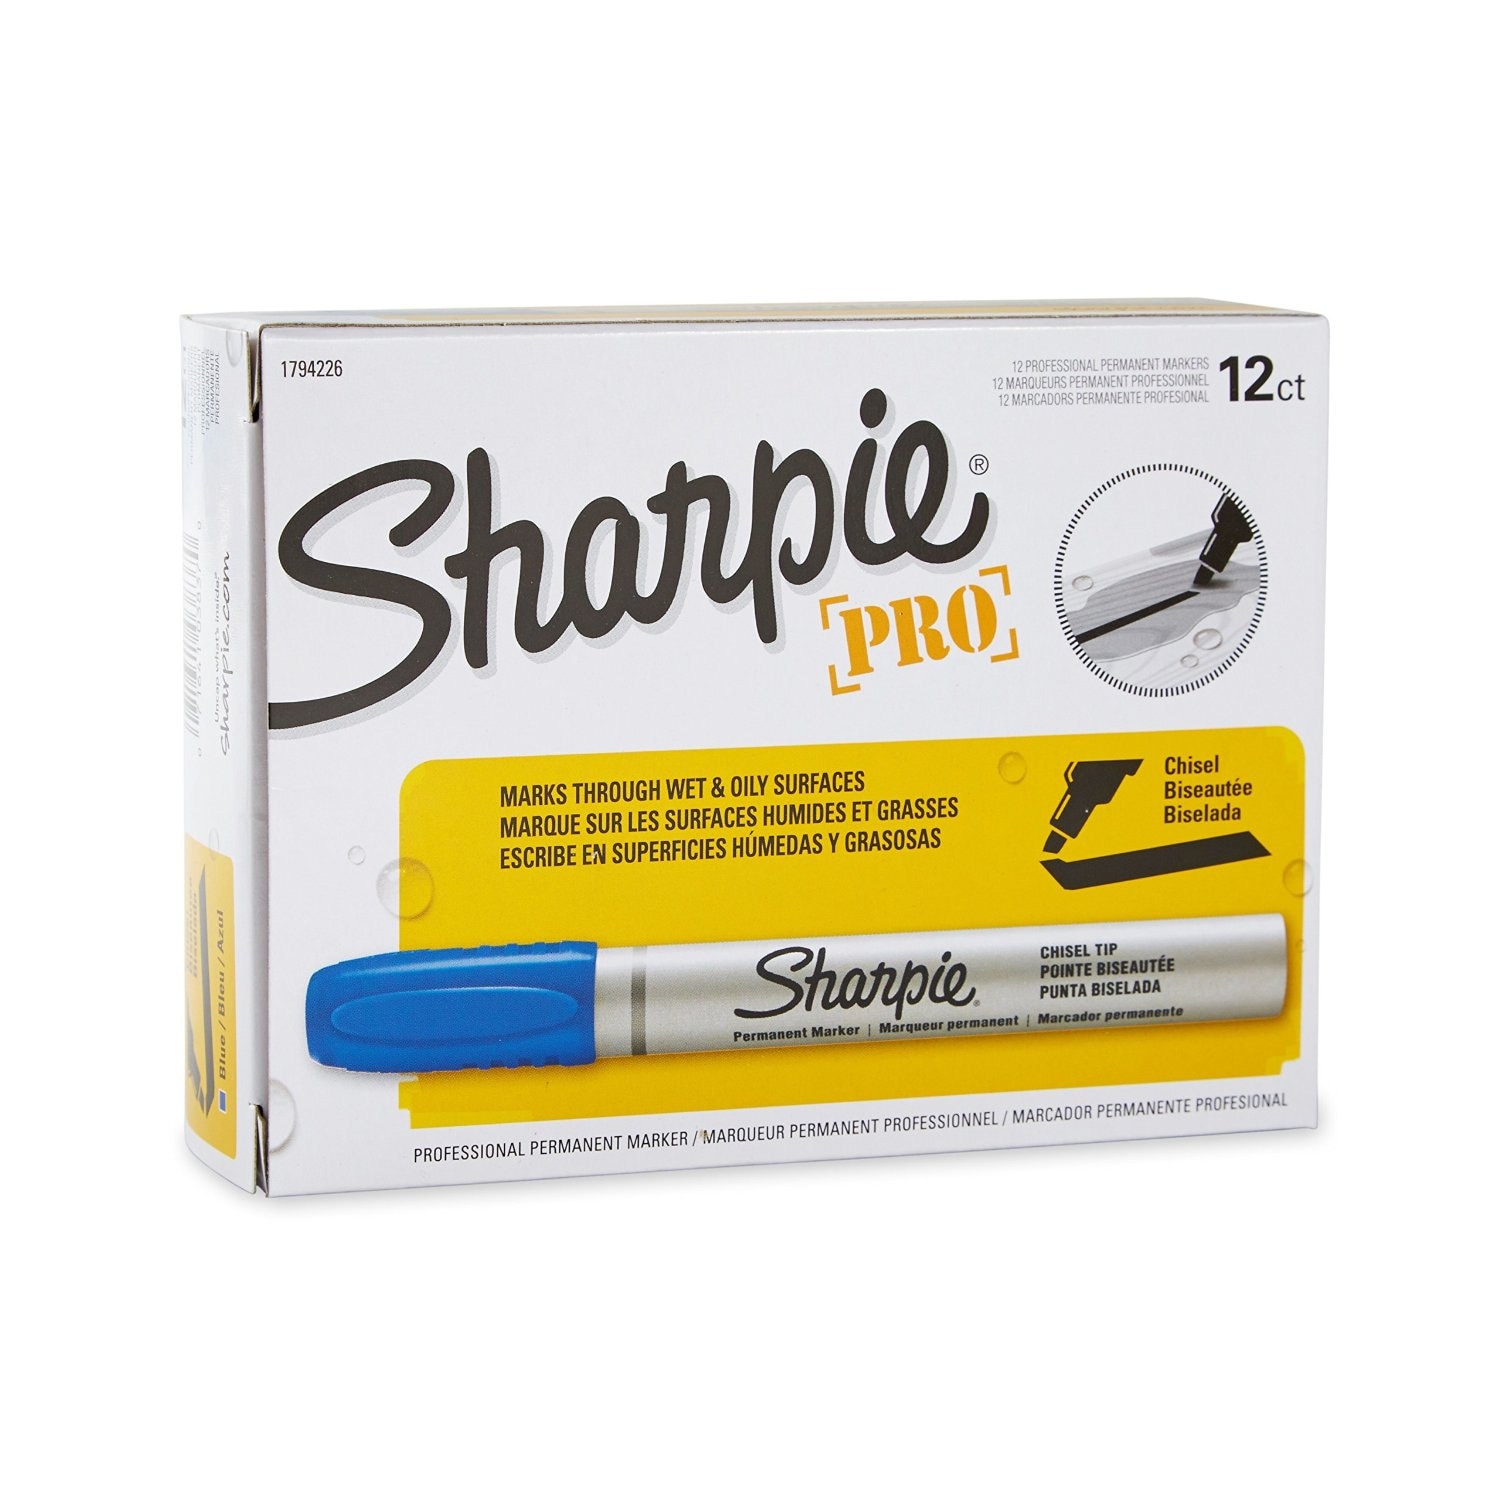 Sharpie Permanent Markers, Fine and Ultra-Fine Tips, 45 Count, Ultimate  Color Collection & Electro Pop Permanent Markers, Fine Point, Assorted  Colors